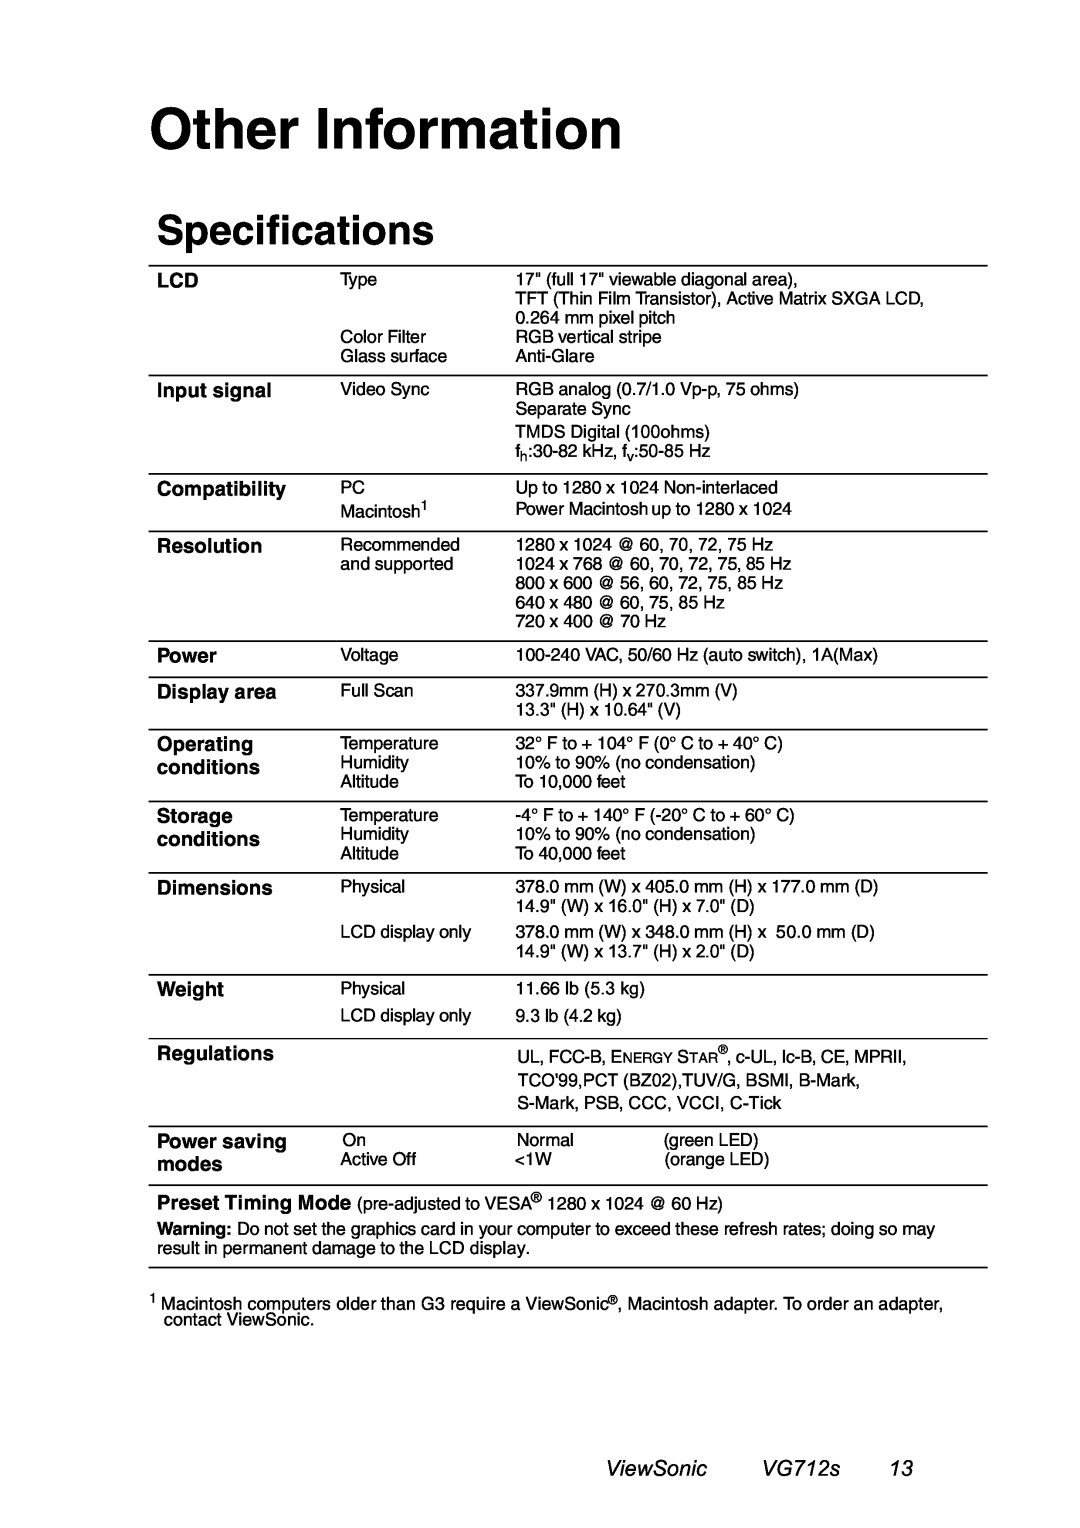 ViewSonic manual Other Information, Specifications, ViewSonic VG712s 